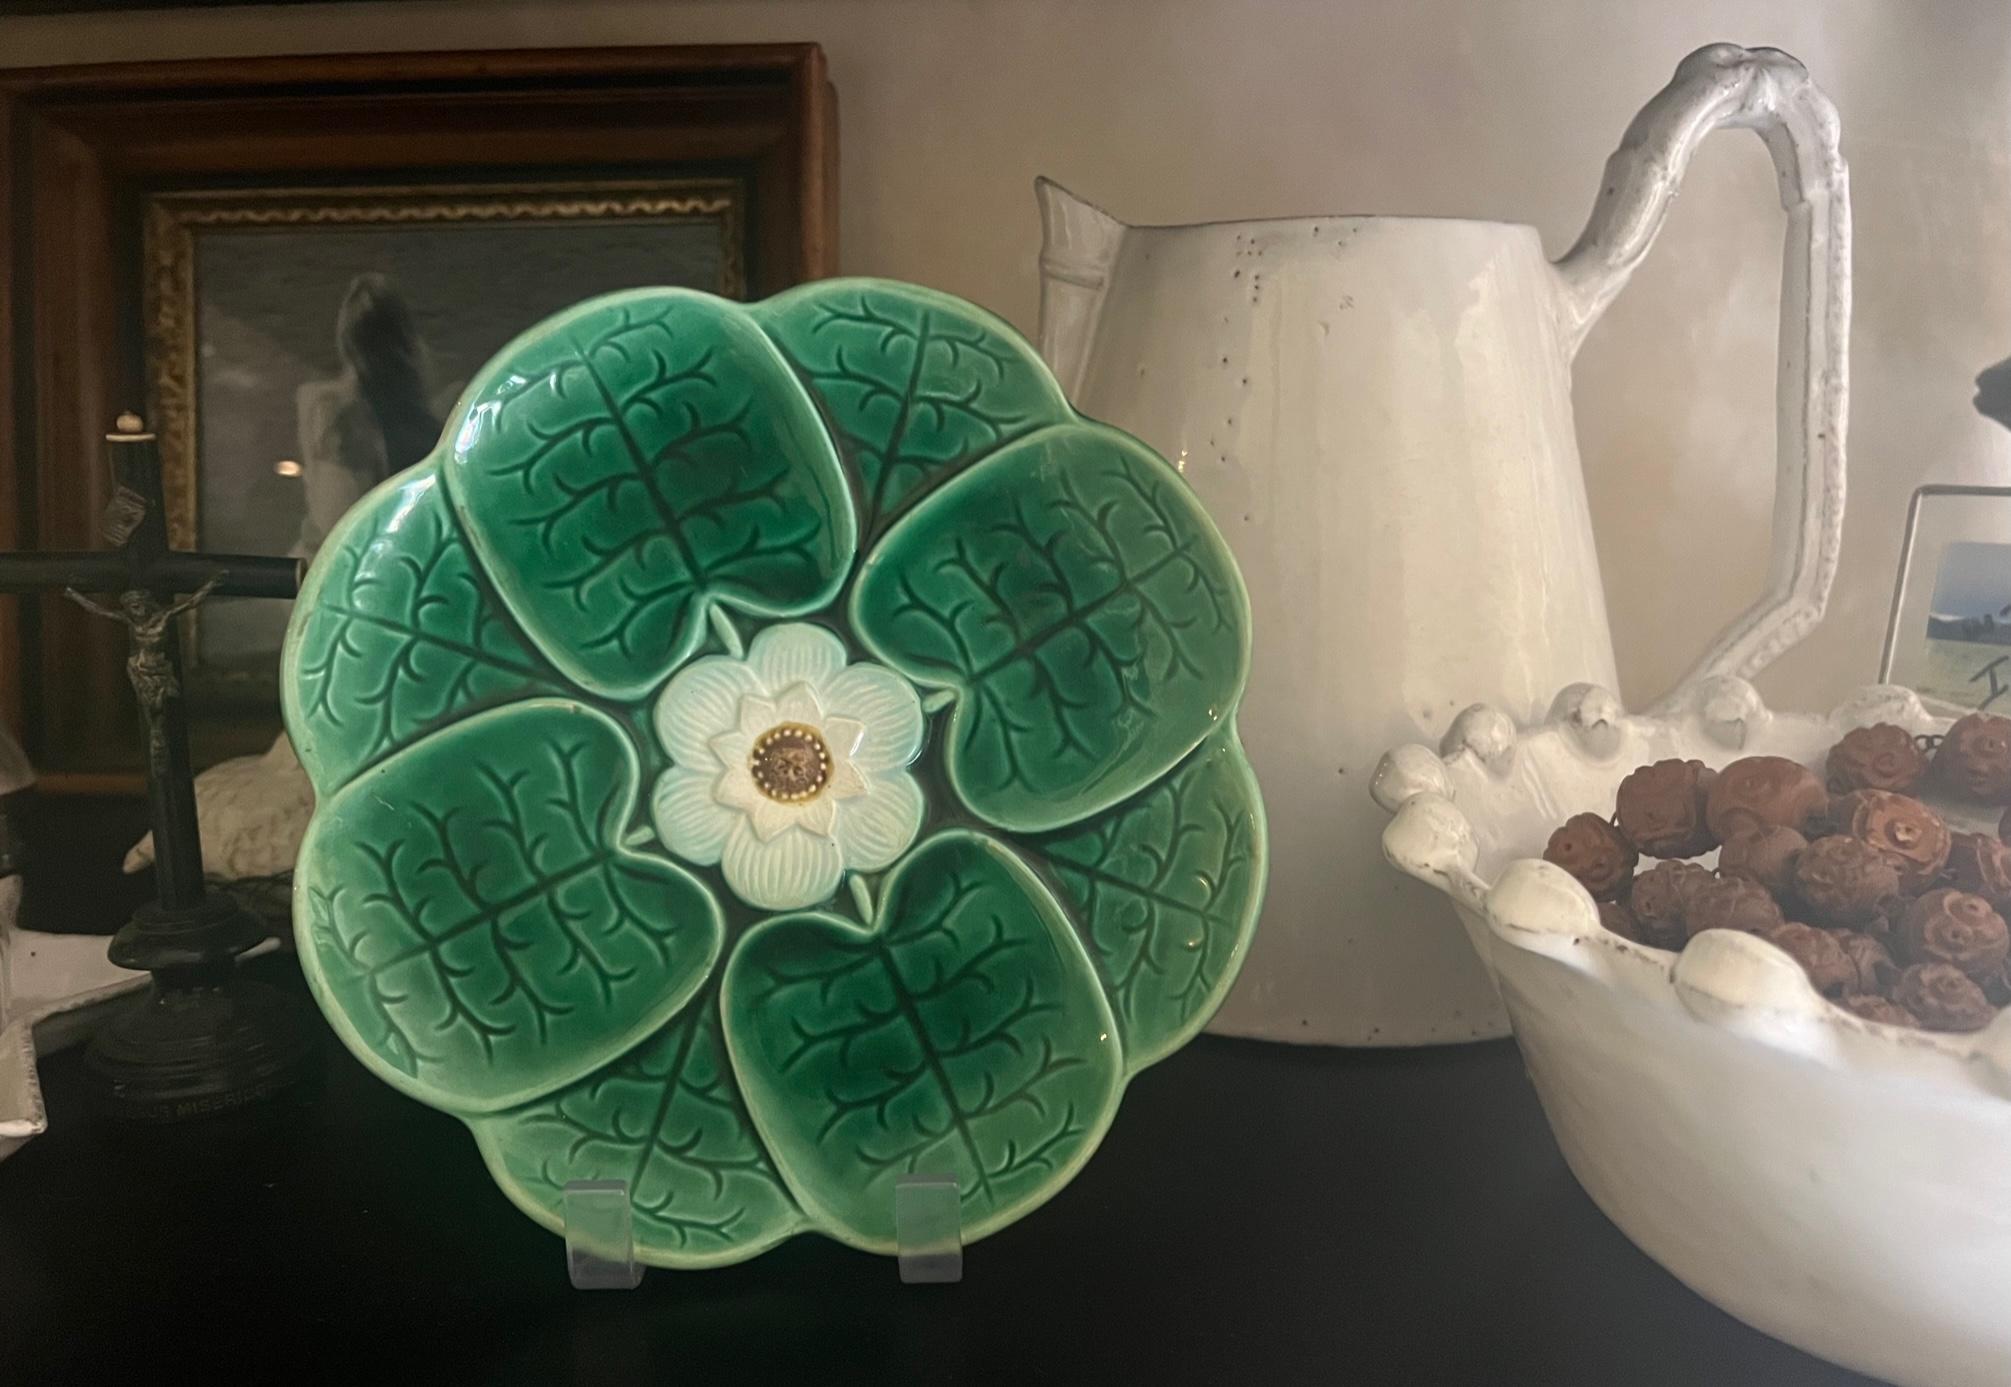 Antique majolica made by Adams and Bromley in the late 19th century. The plate has vibrant green leaves surrounding a central white flower with faint hints of blue.

This is the smaller of the two Adams & Bromley plates in the same pattern, one is